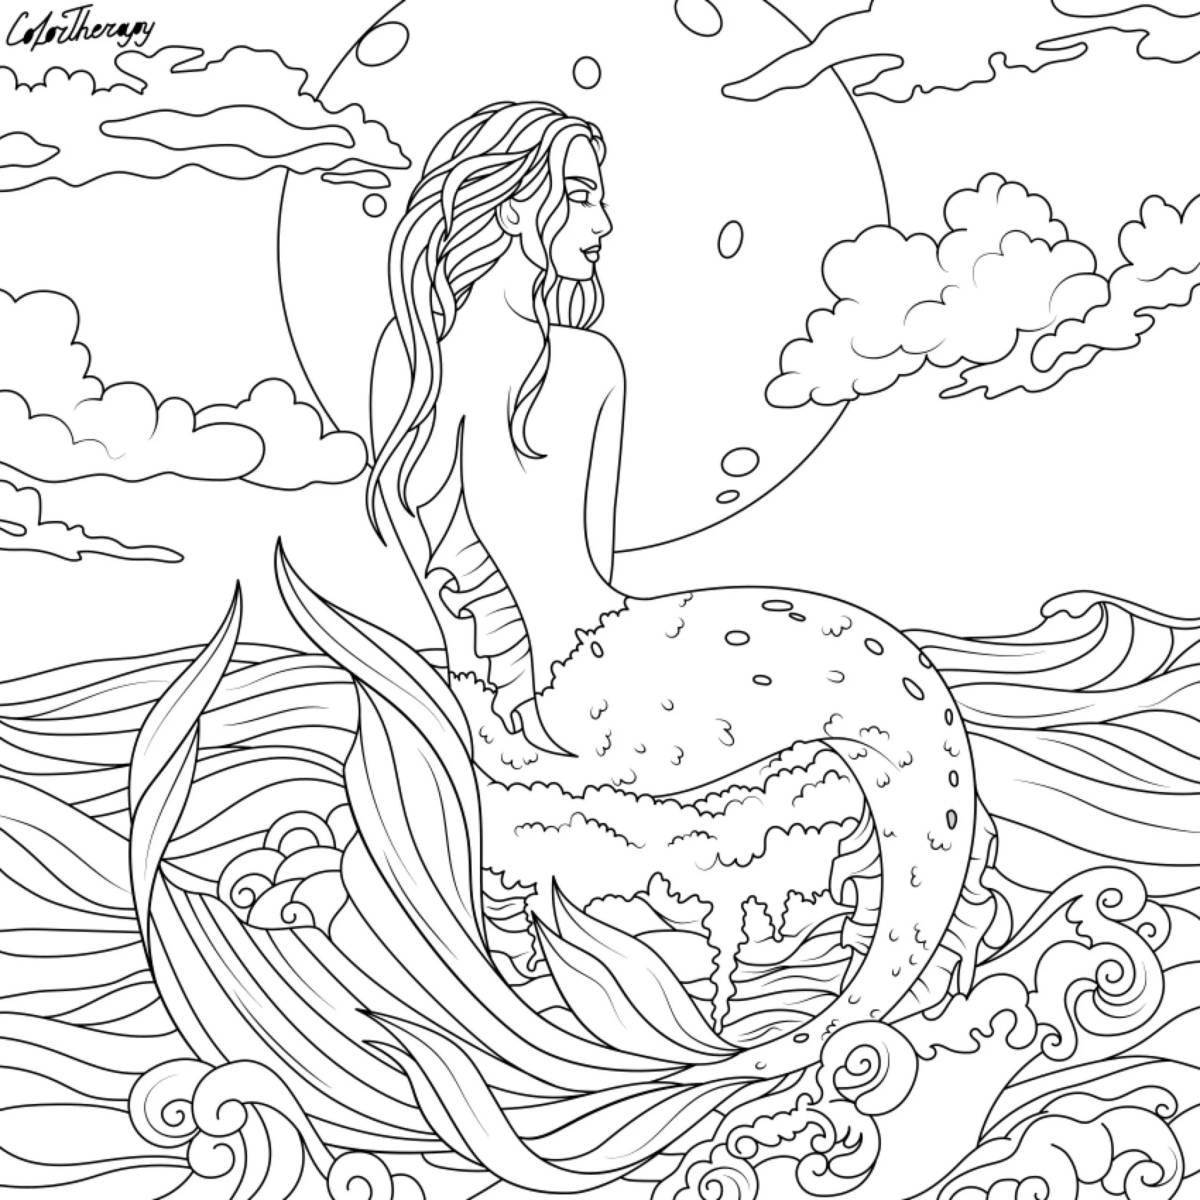 Amazing coloring pages of a witch from Slavic myths